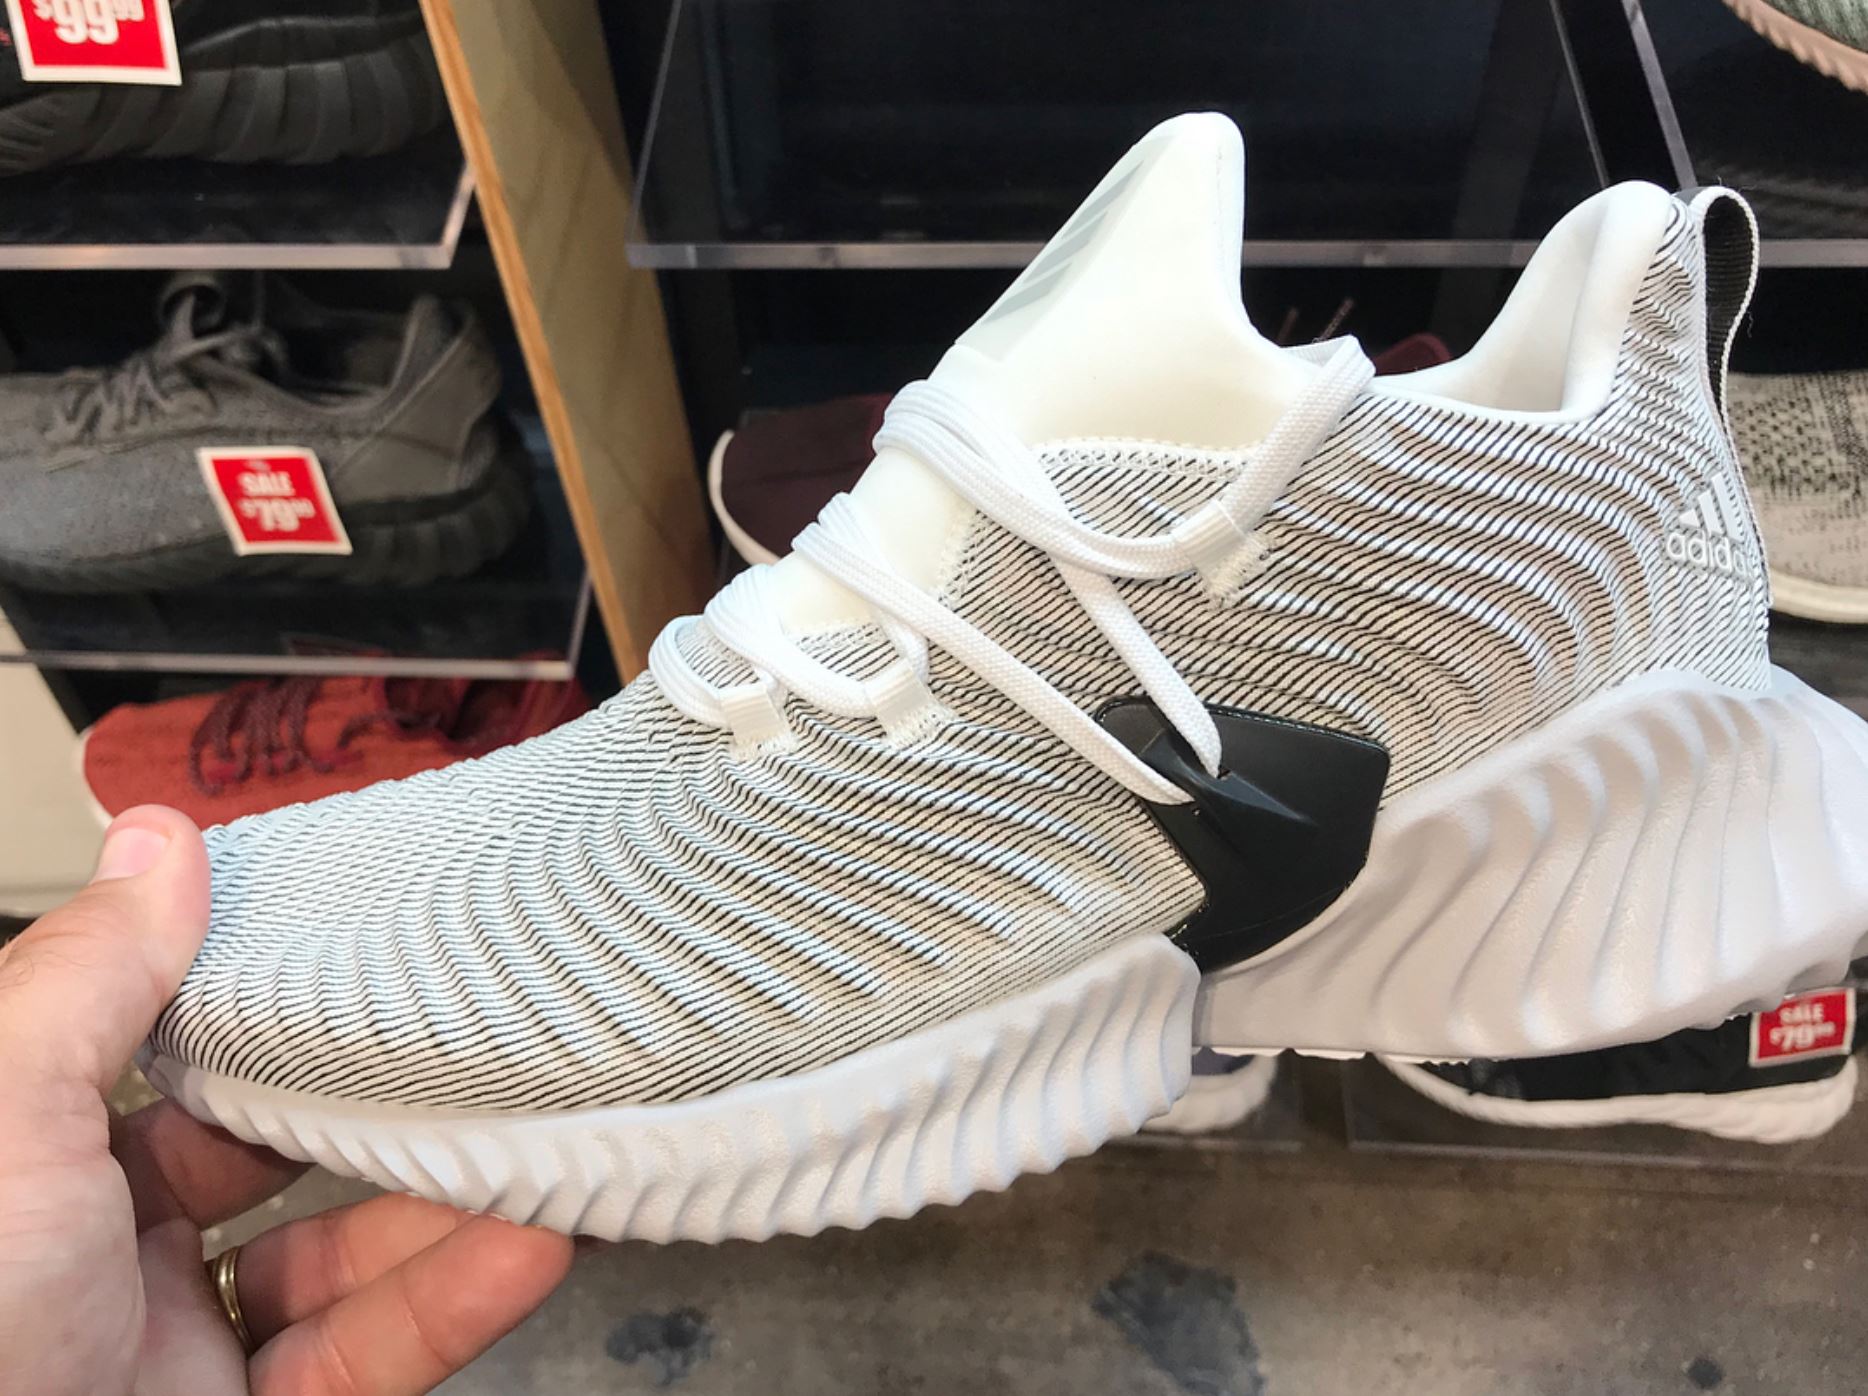 The adidas AlphaBounce Instinct Offers an Aggressive Look and ...